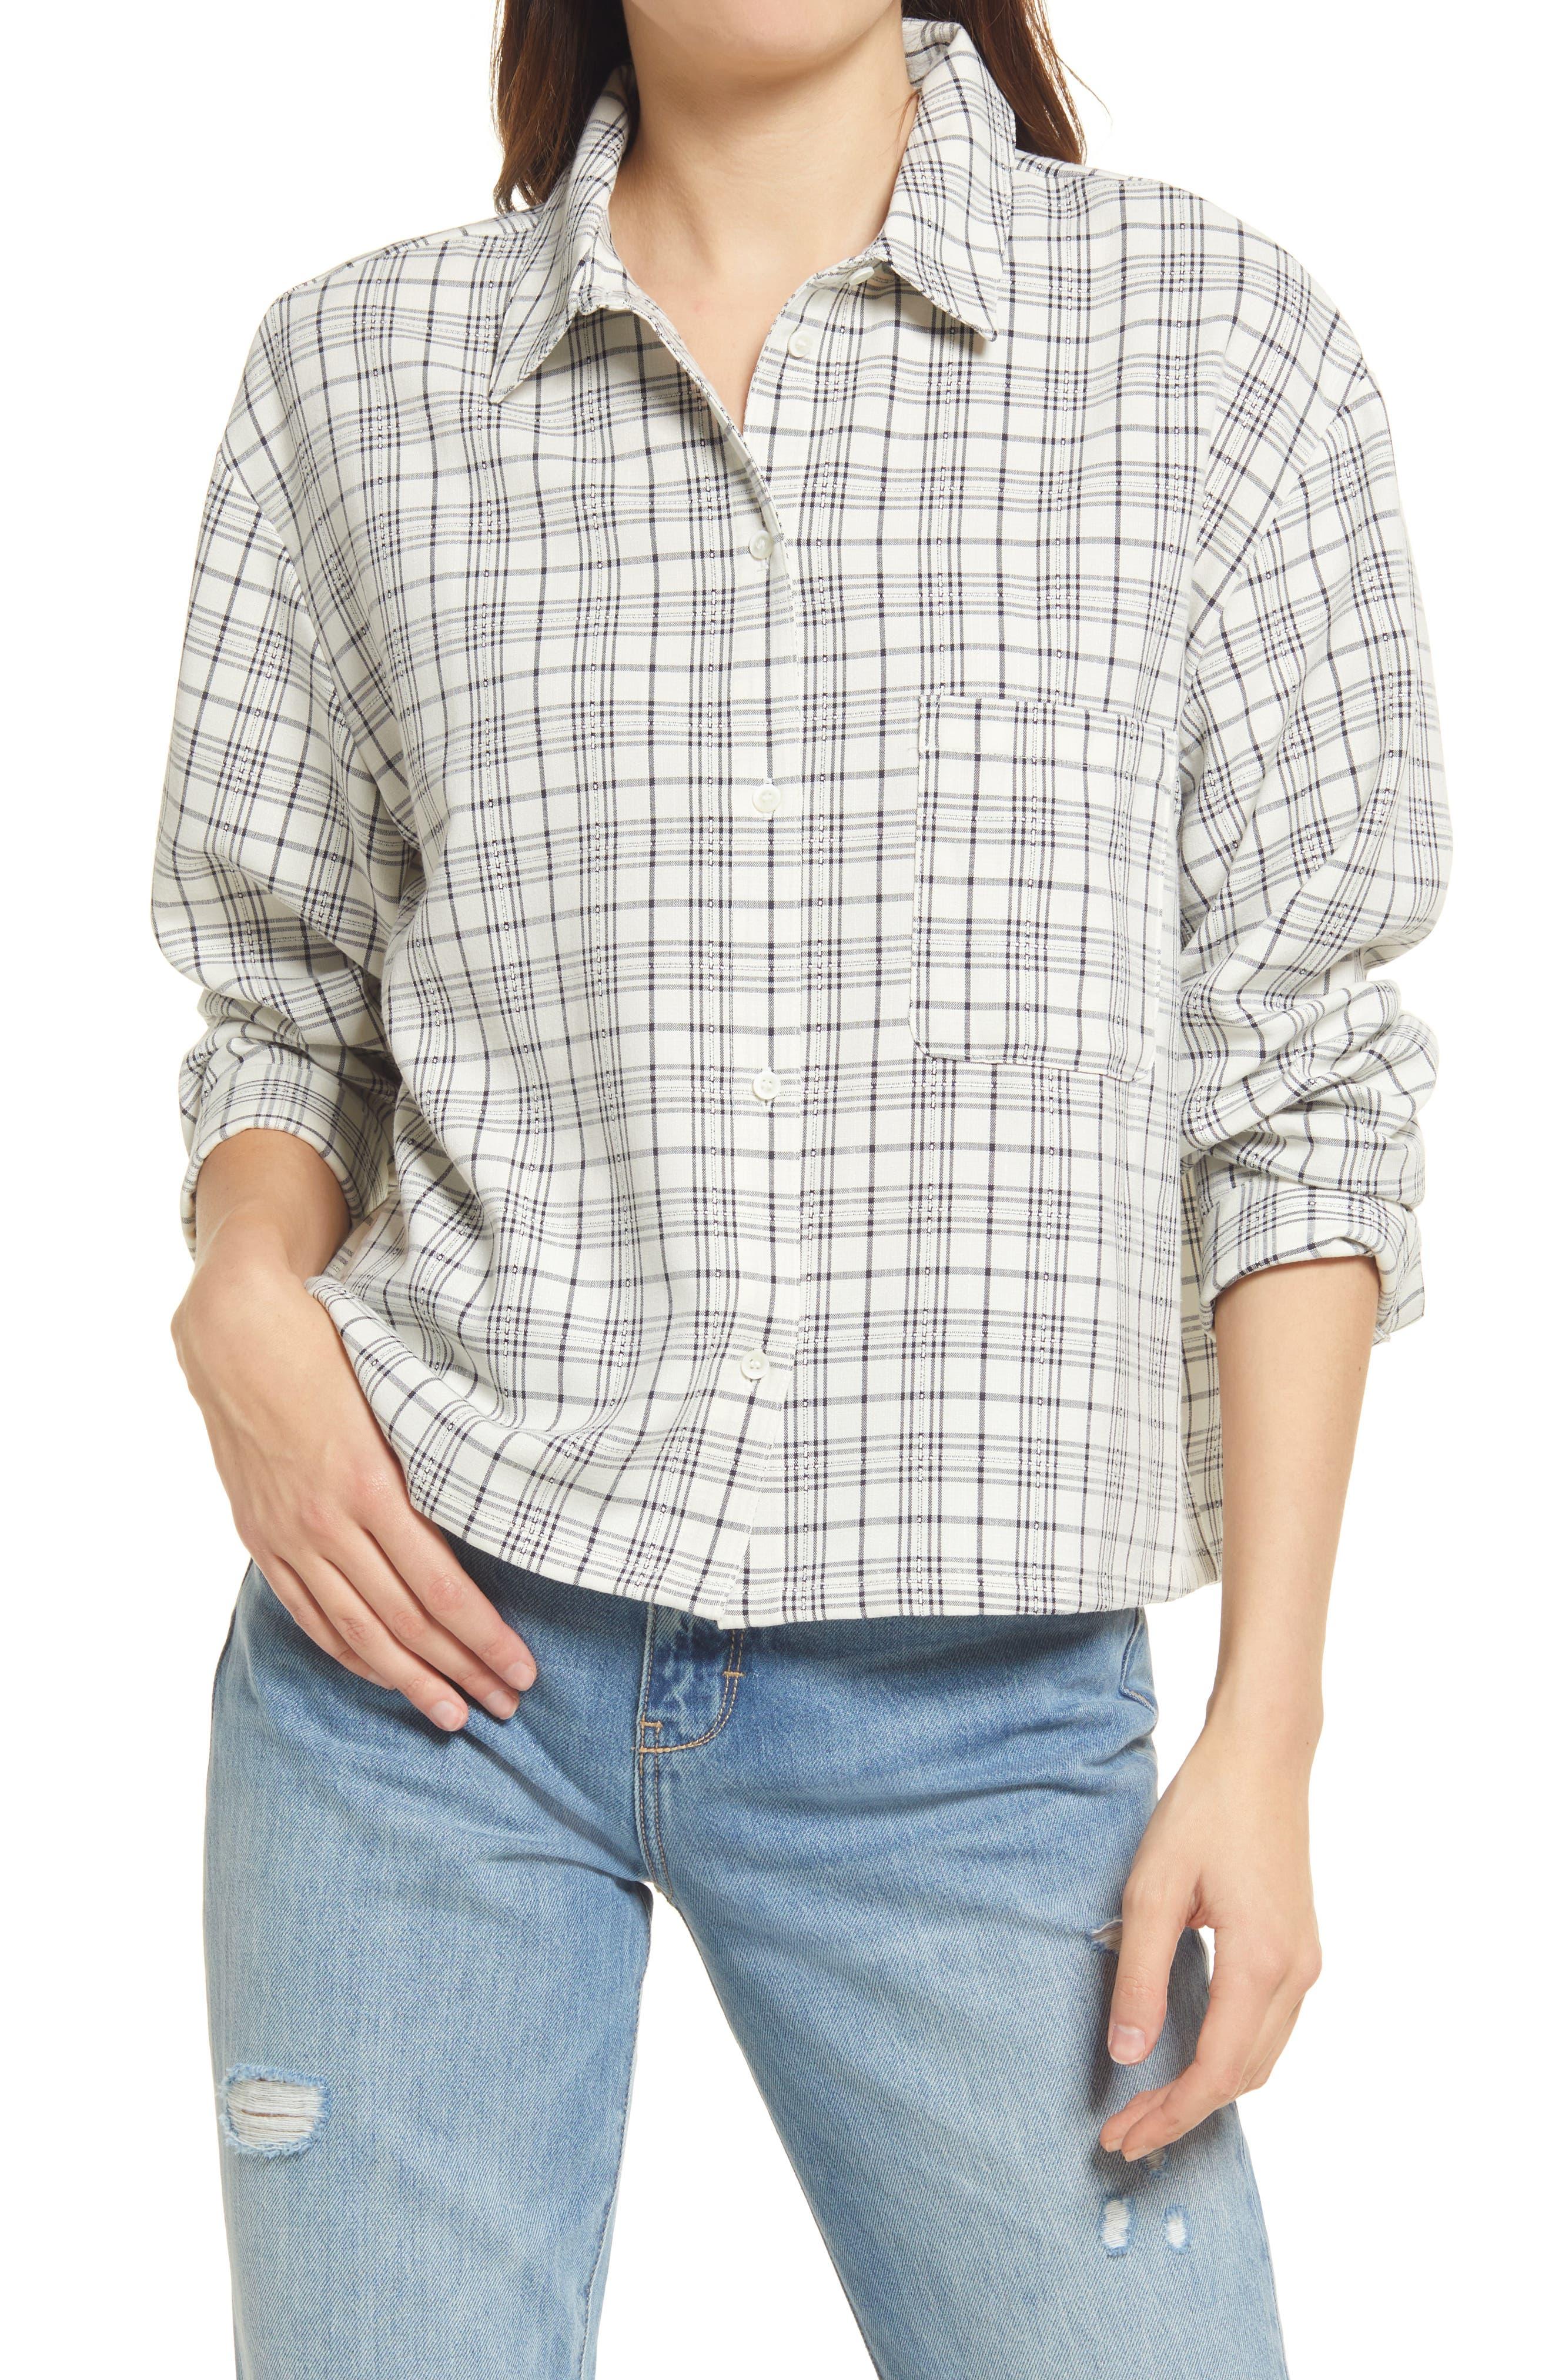 Treasure & Bond One-pocket Button-up Shirt in White | Lyst